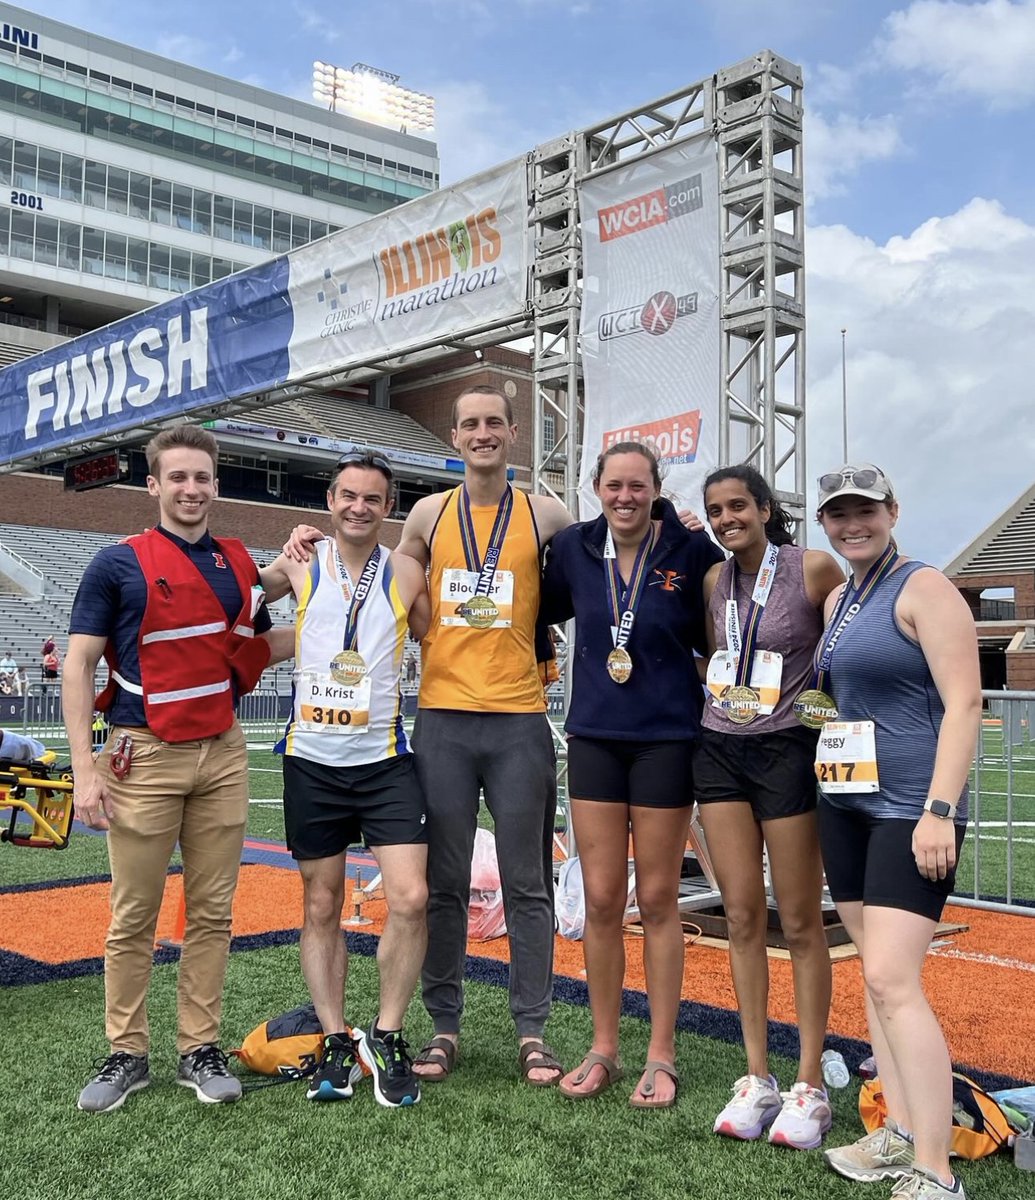 🩺 #ILLINOISmed students tackle one last challenge before heading to residency- the Illinois Marathon 🏃‍♀️🏆! There is no challenge these Physician Innovators can’t tackle. Congrats, @PeggyPalsgaard, Conor, David, Anila, and Priya!